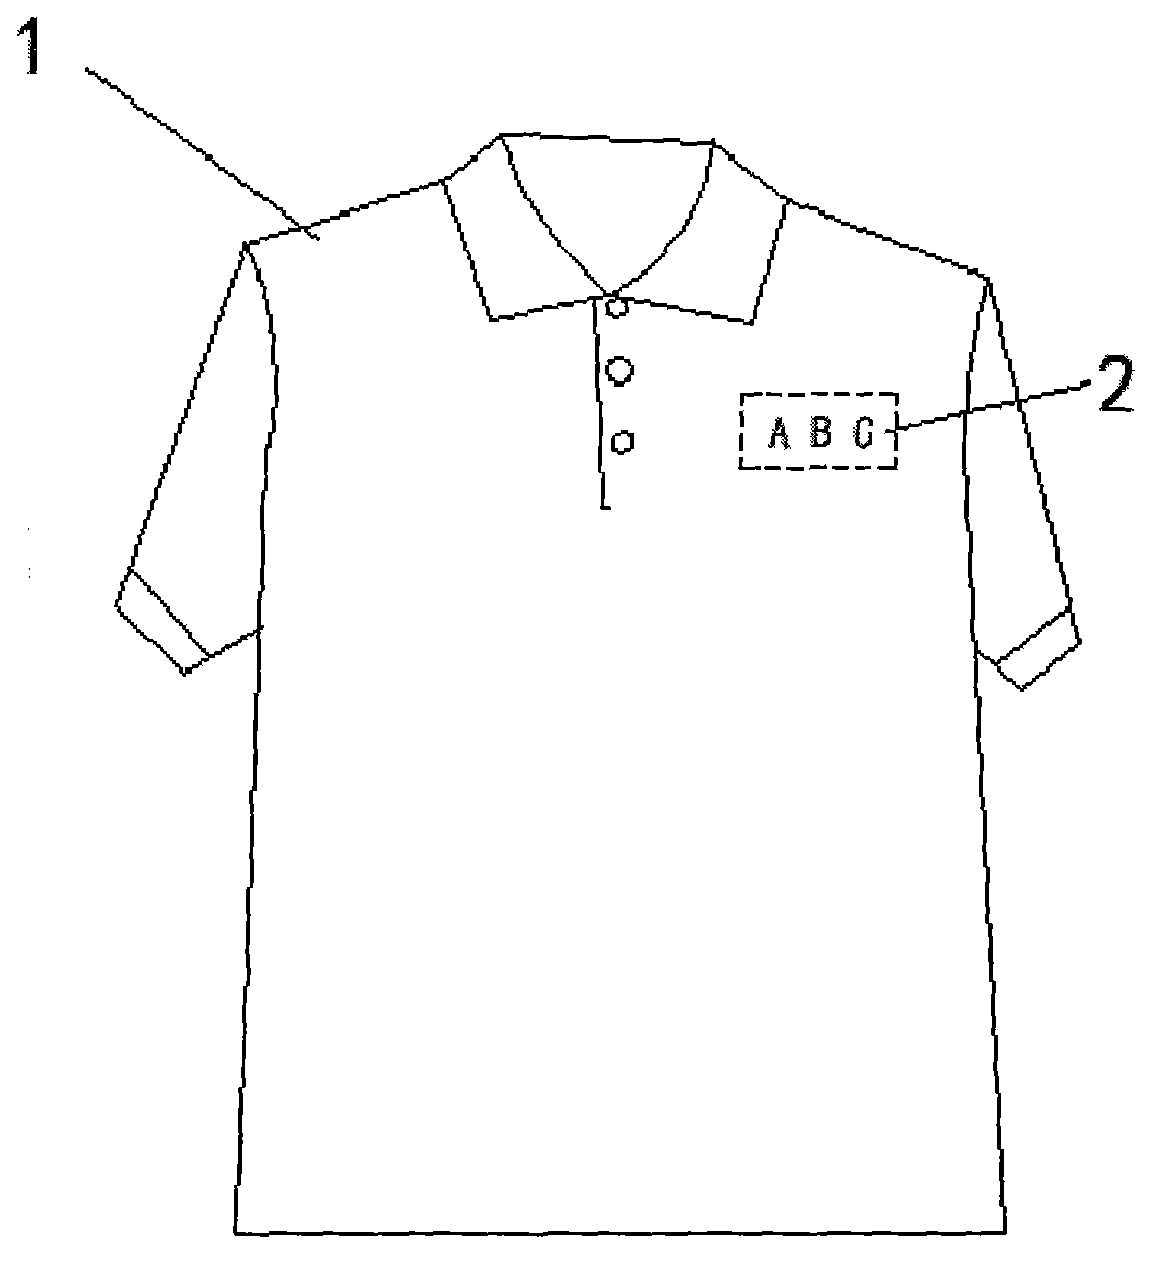 Environment-friendly garment with non-touch trade mark